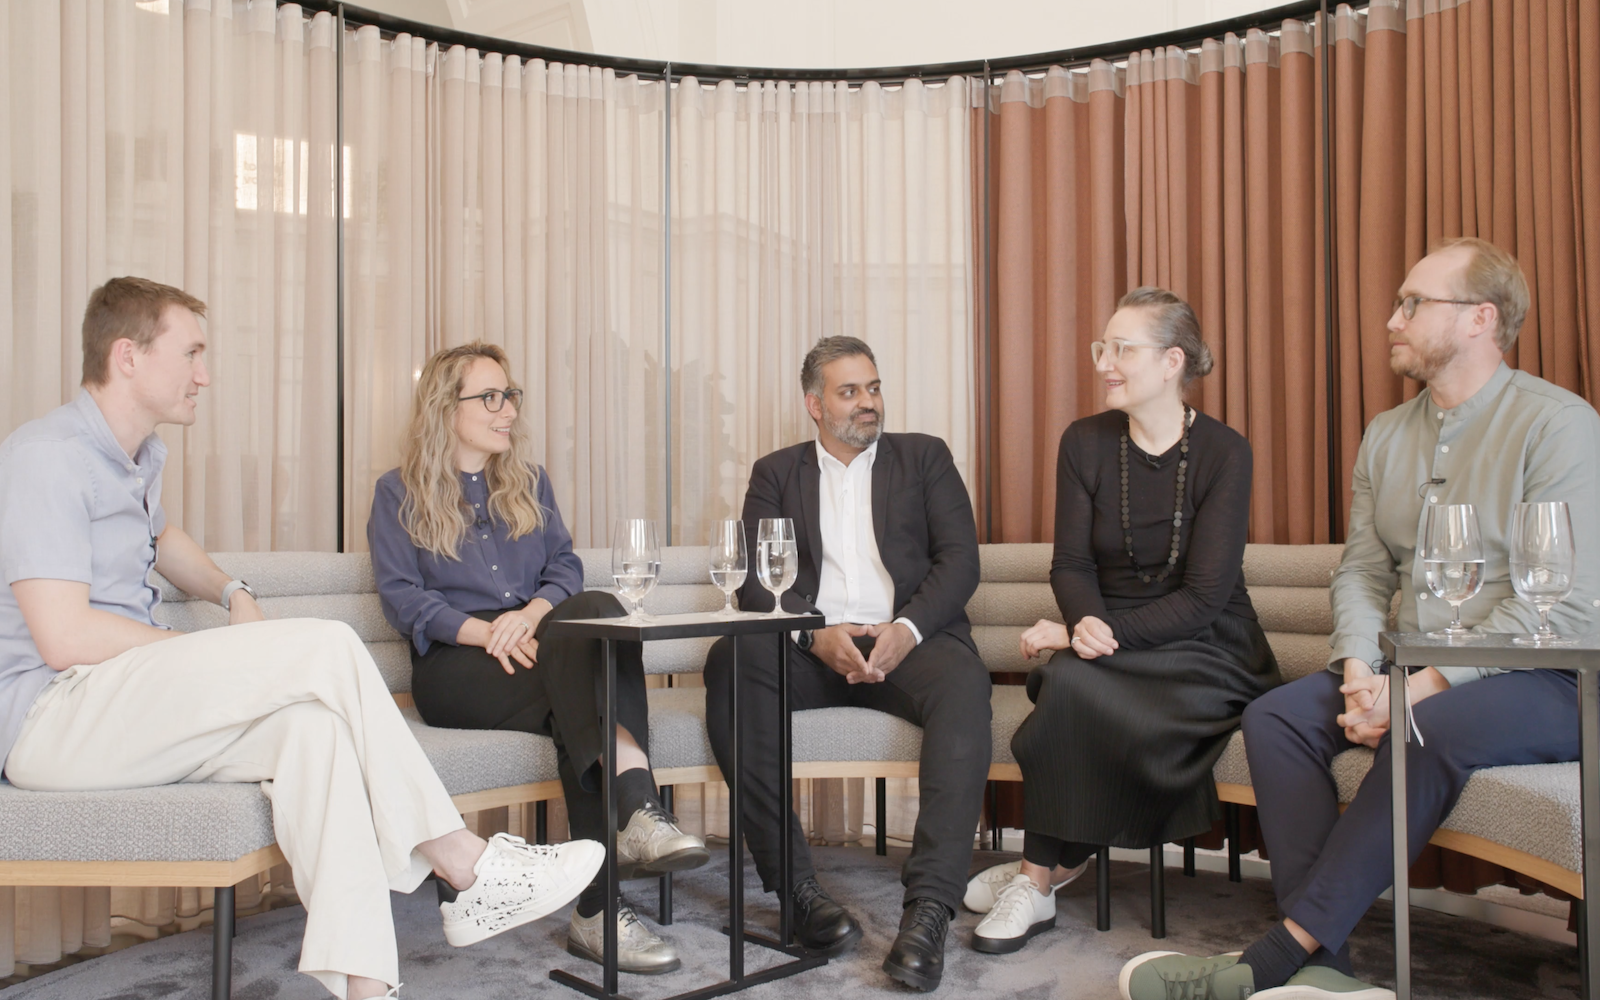 roundtable discussion on blurring the boundaries in design on location at Table Place Chairs in London